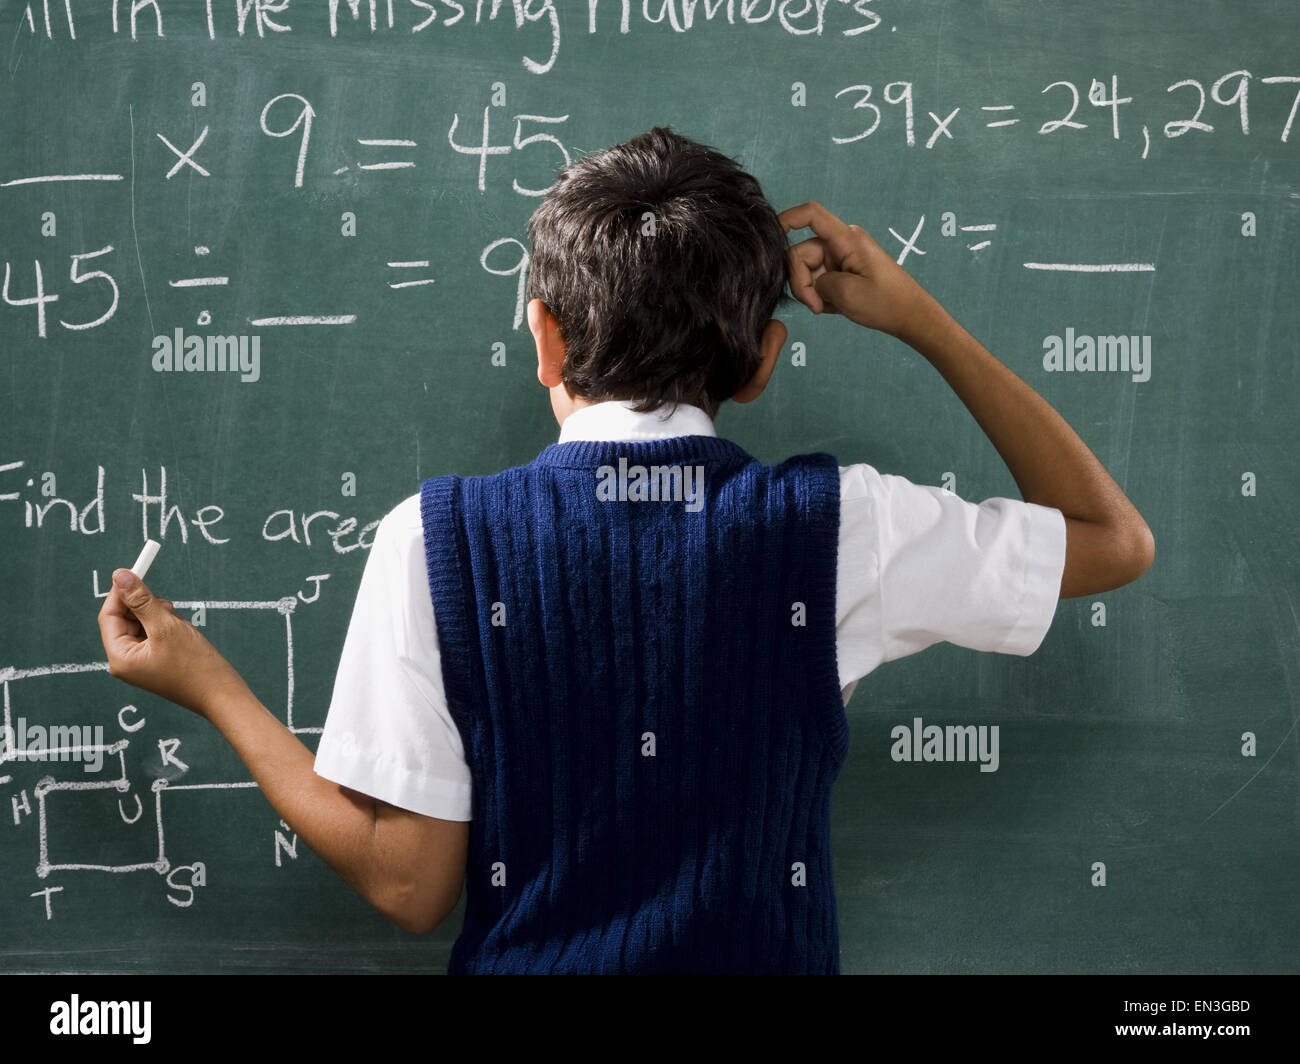 Rear view of boy at chalkboard doing math formulas and scratching head Stock Photo